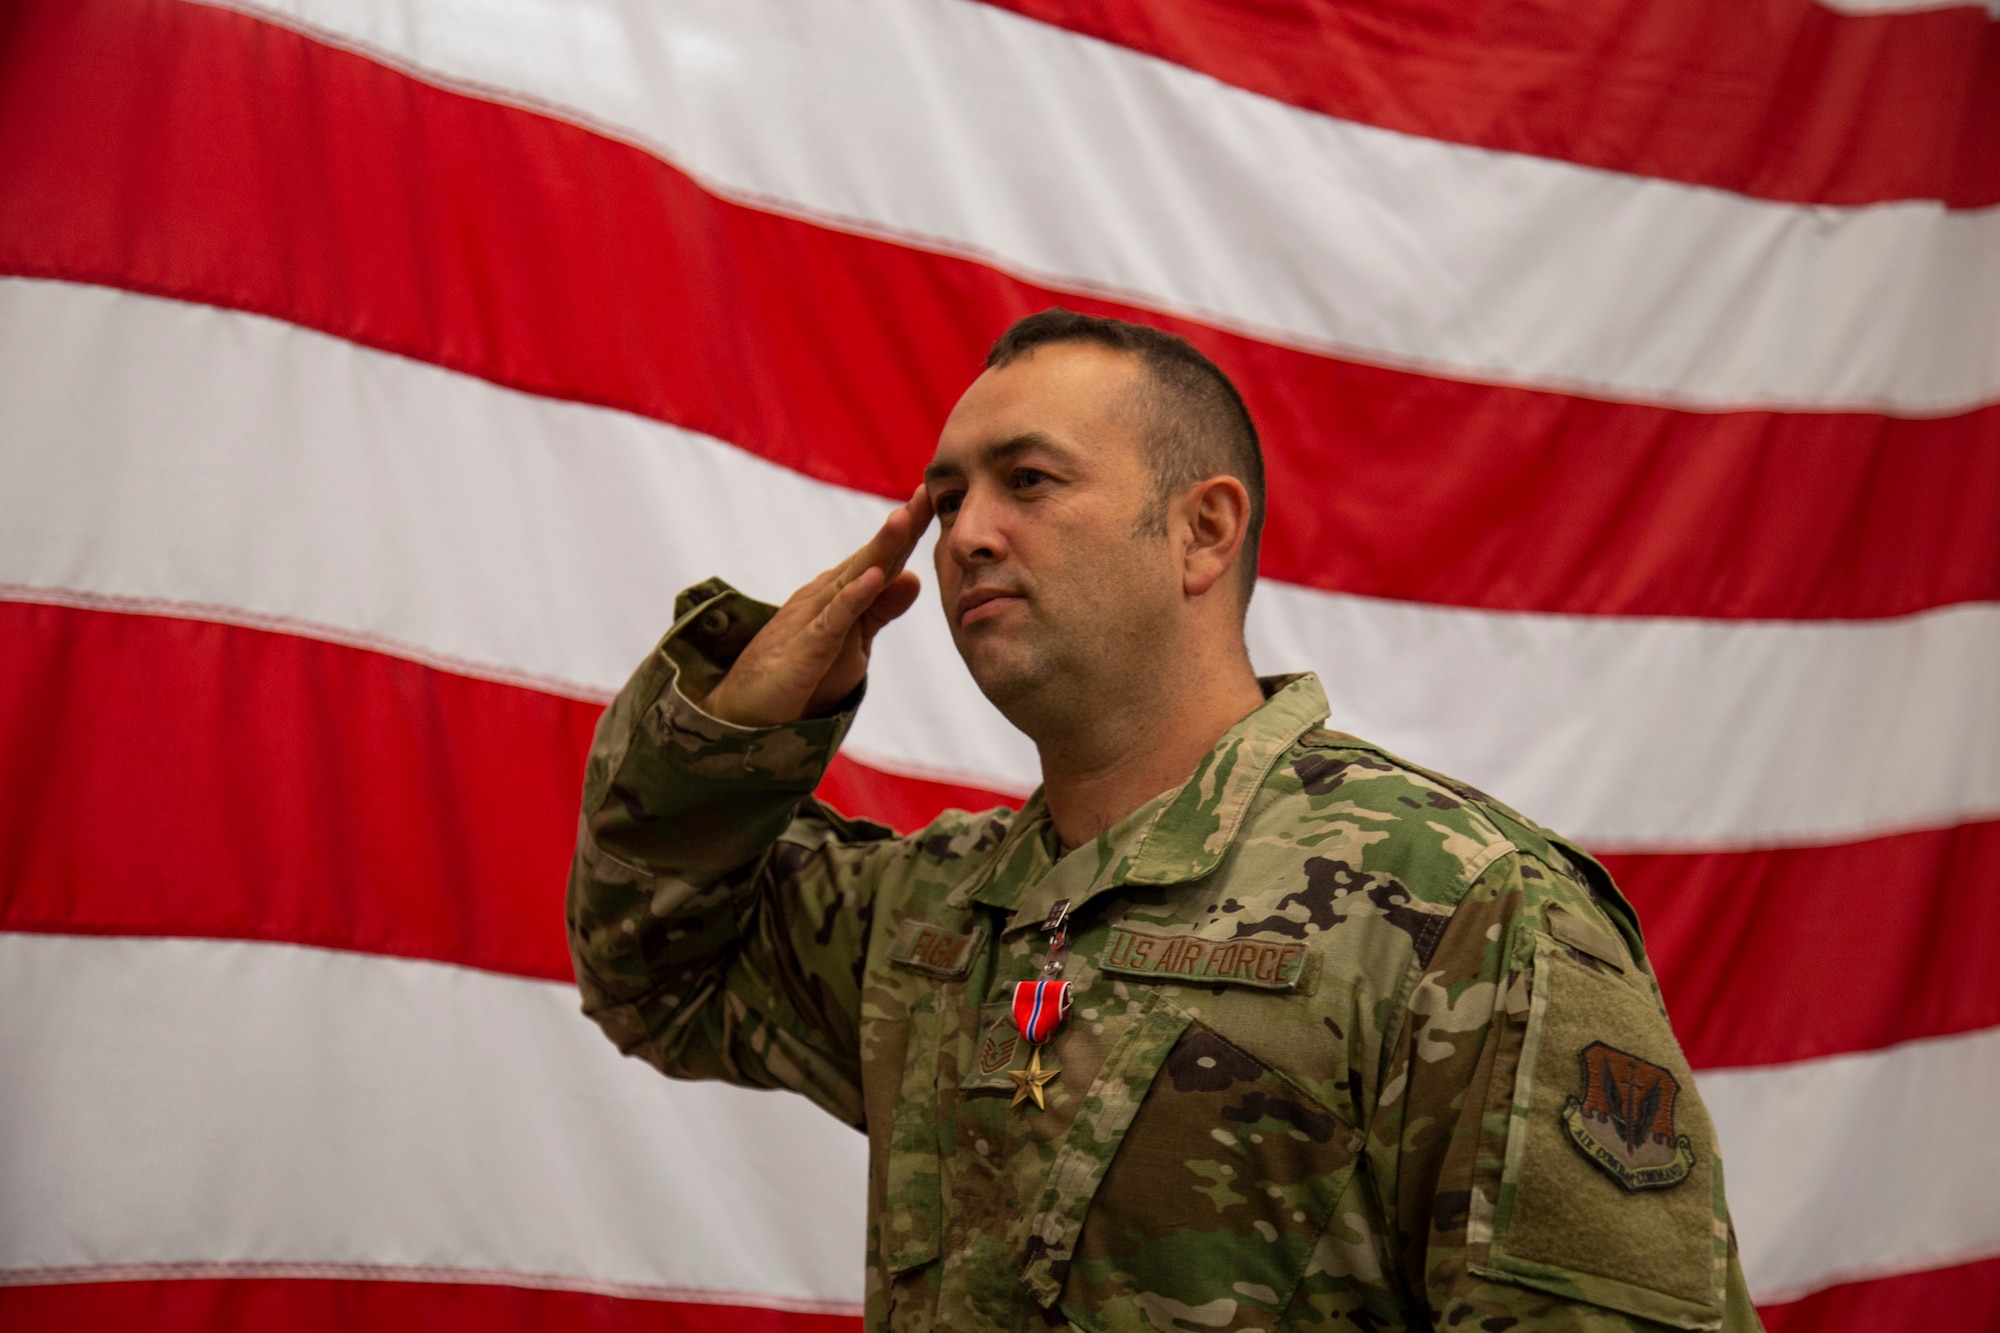 Master Sgt. Timothy Fagan, 726th Air Control Squadron signal communications operation flight superintendent, salutes during award ceremony, at Mountain Home Air Force Base, Idaho, Oct. 16, 2020. Fagan was awarded the Bronze Star Medal for his meritorious achievement while deployed. (U.S. Air Force Photo by Airman 1st Class Eric Brown)